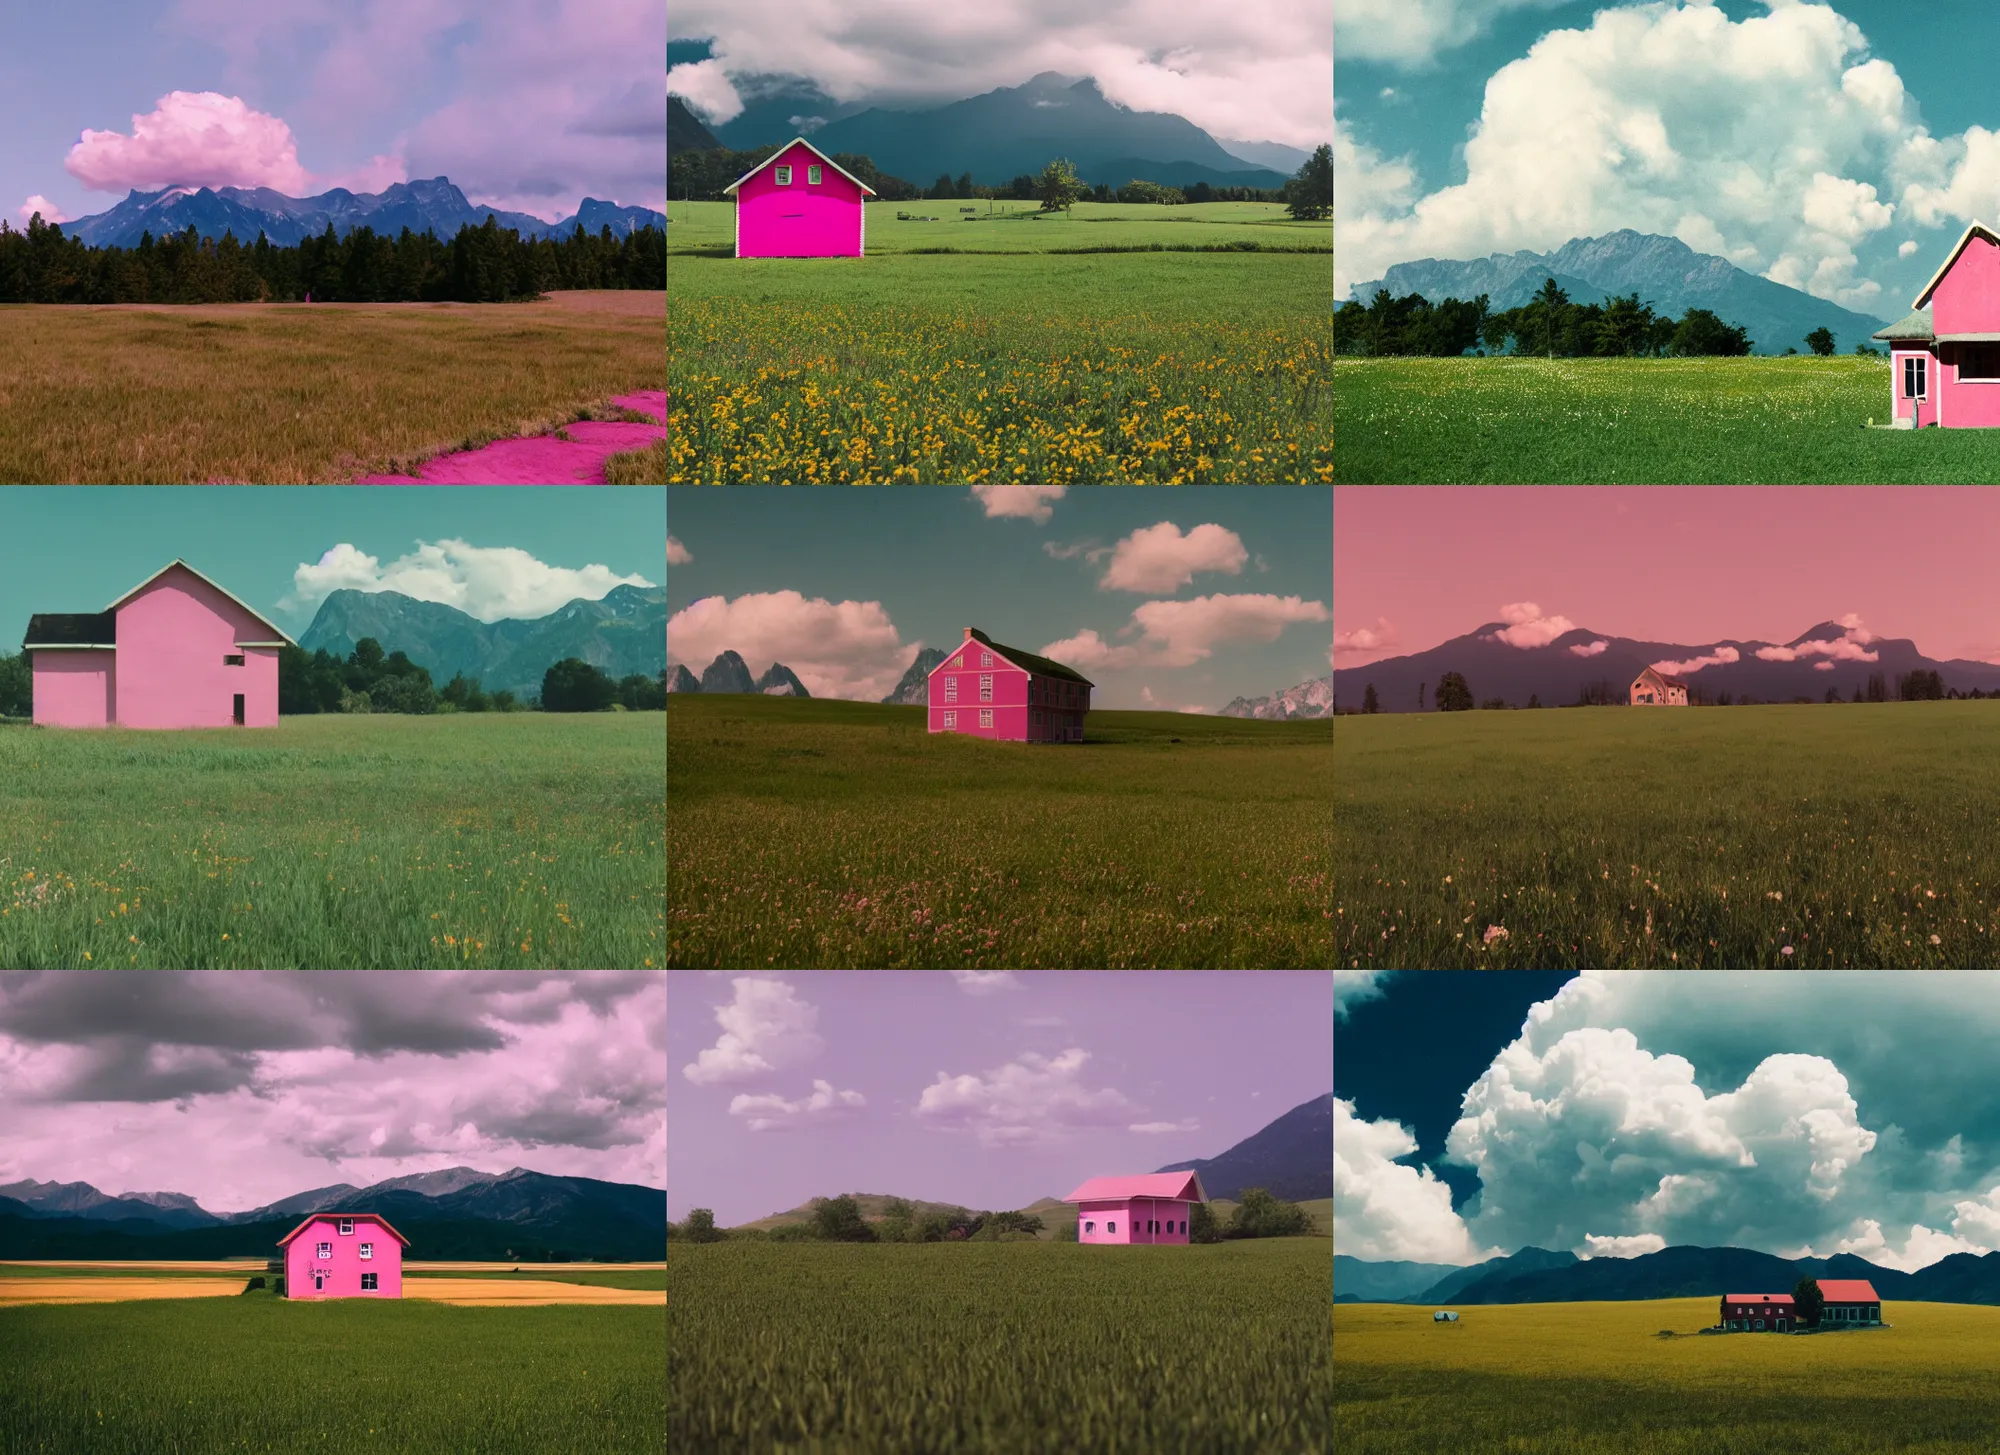 Prompt: still frame from a wes anderson movie of a meadow with a small pink farm house and mountains, massive clouds, 1 6 mm f 1. 4 lens, nikkor, canon, sigma, award - winning landscape photography